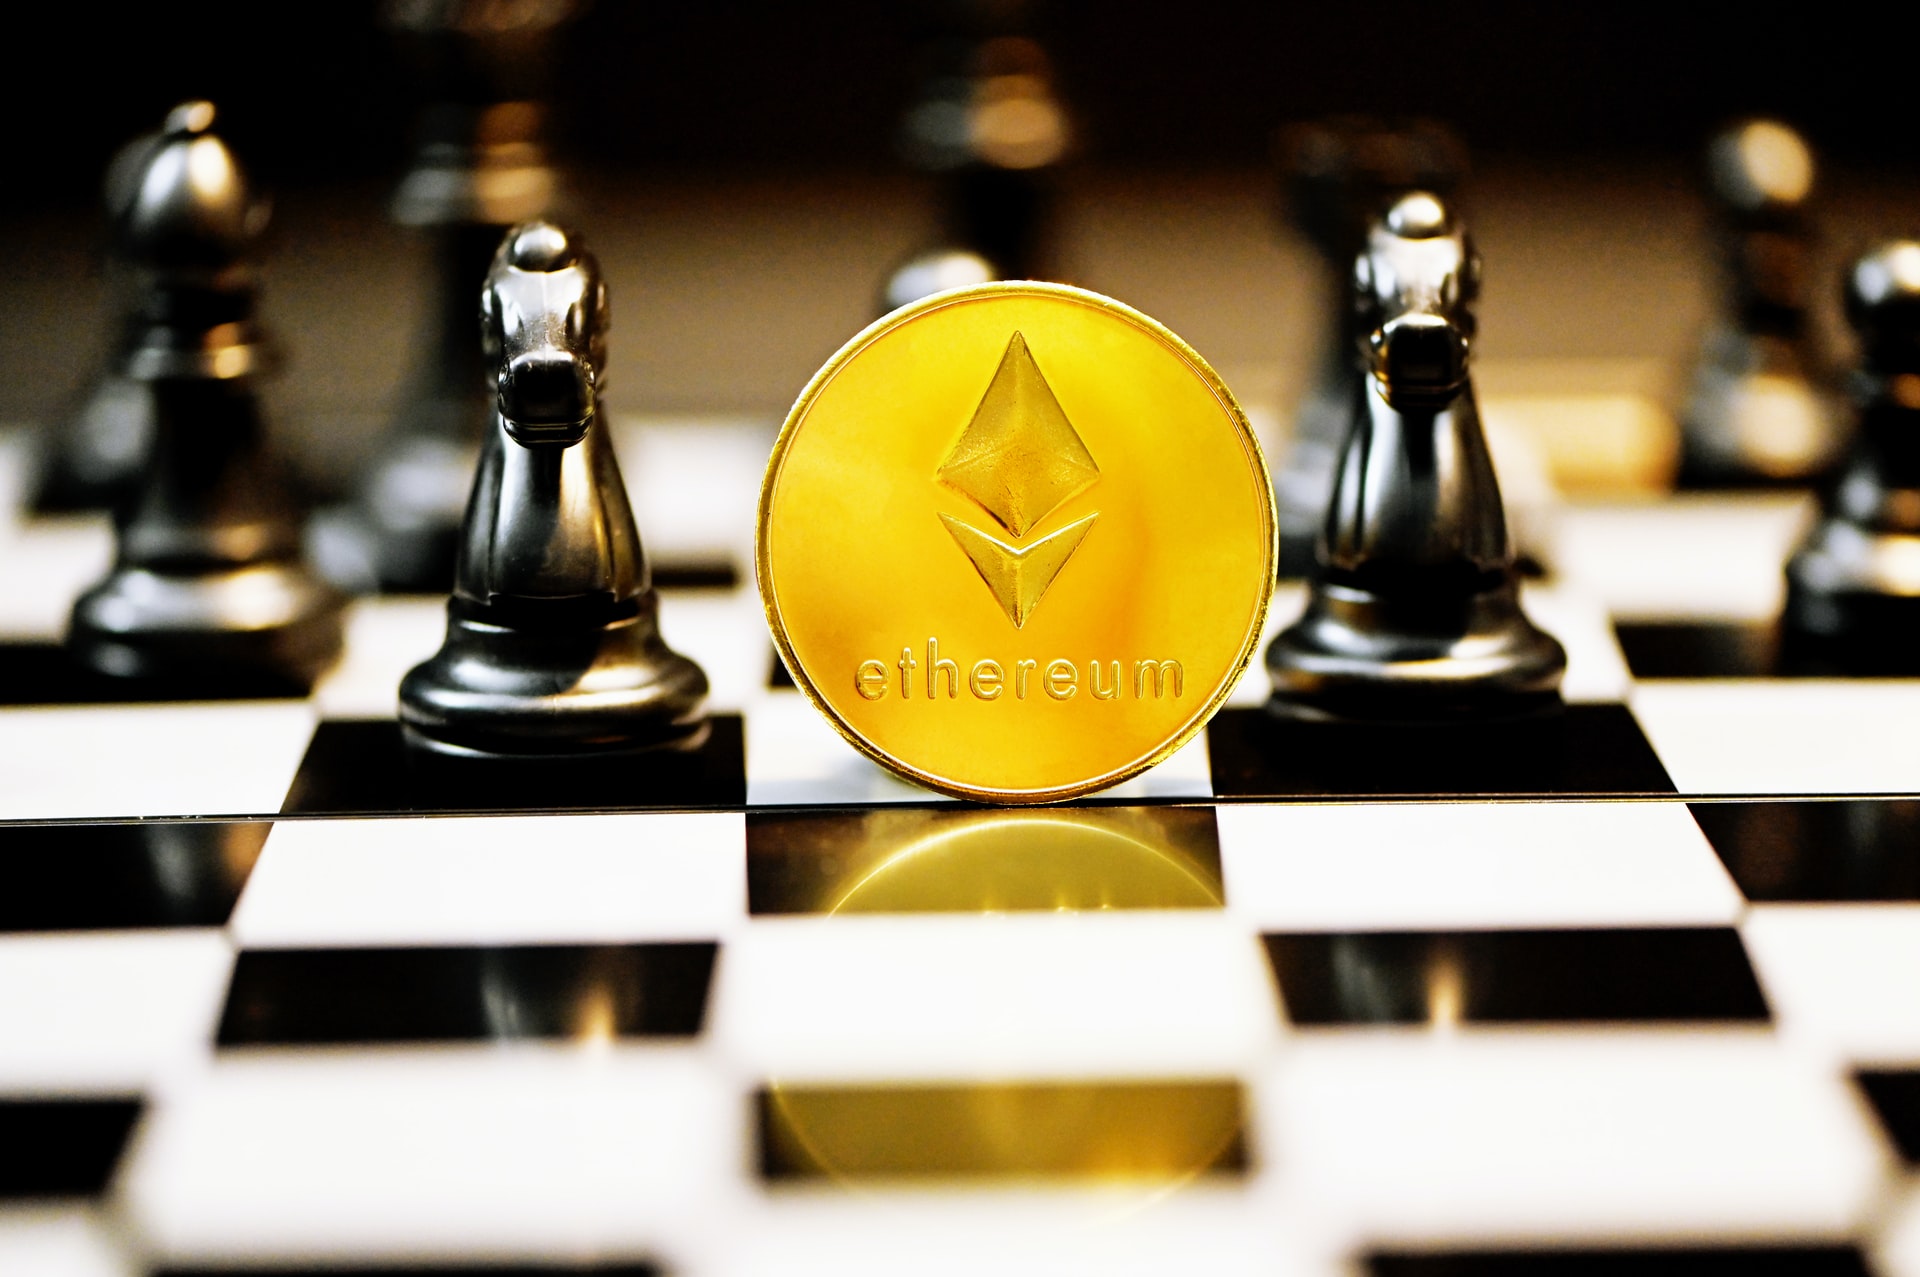 Facts About Ethereum Coins